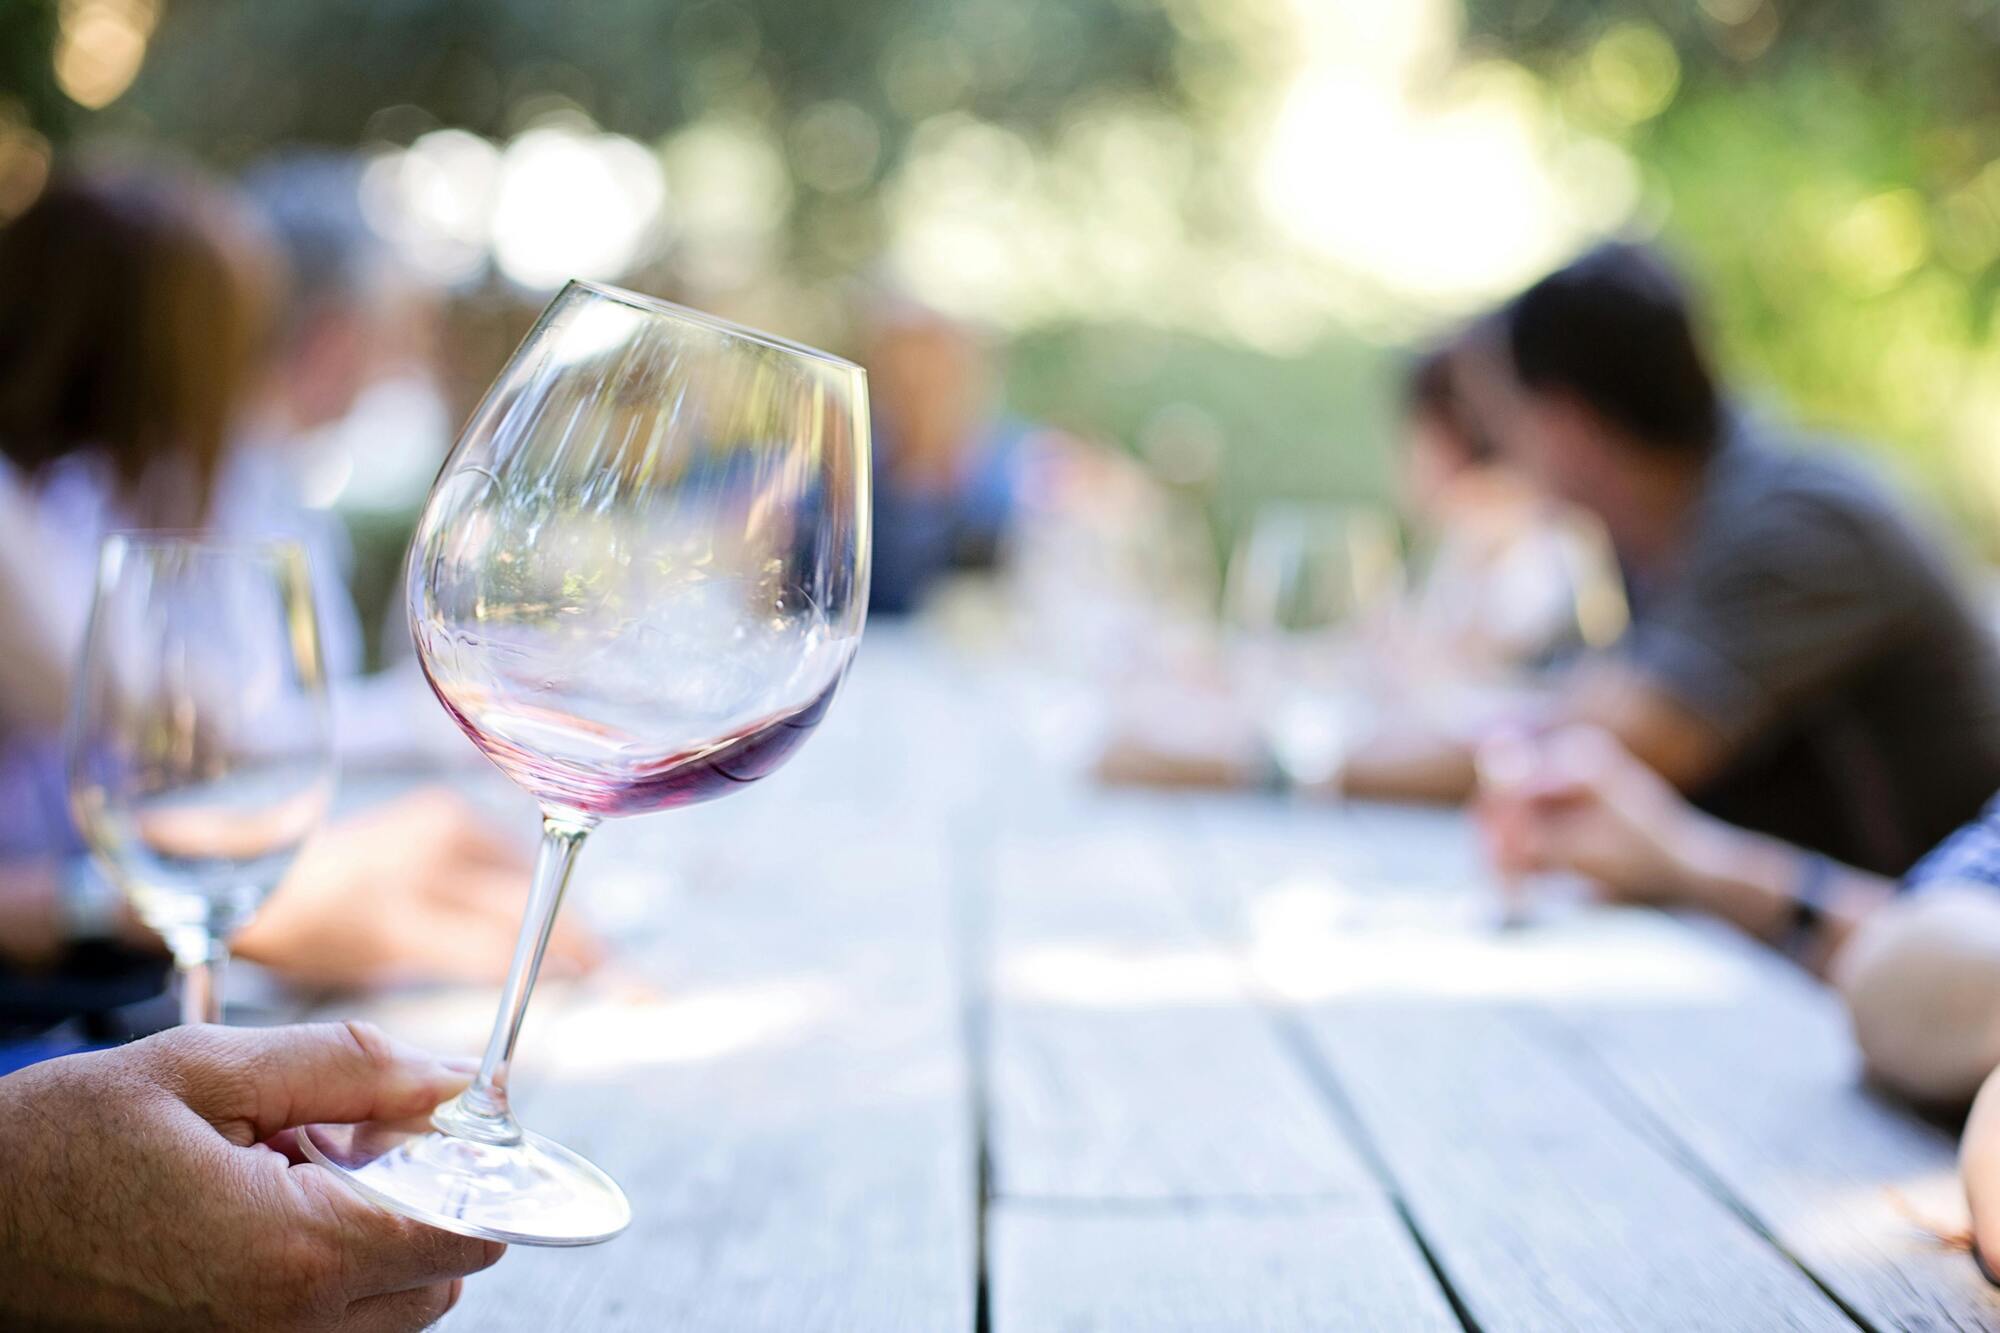 You've always served wine incorrectly: an expert talks about the 20/20 rule